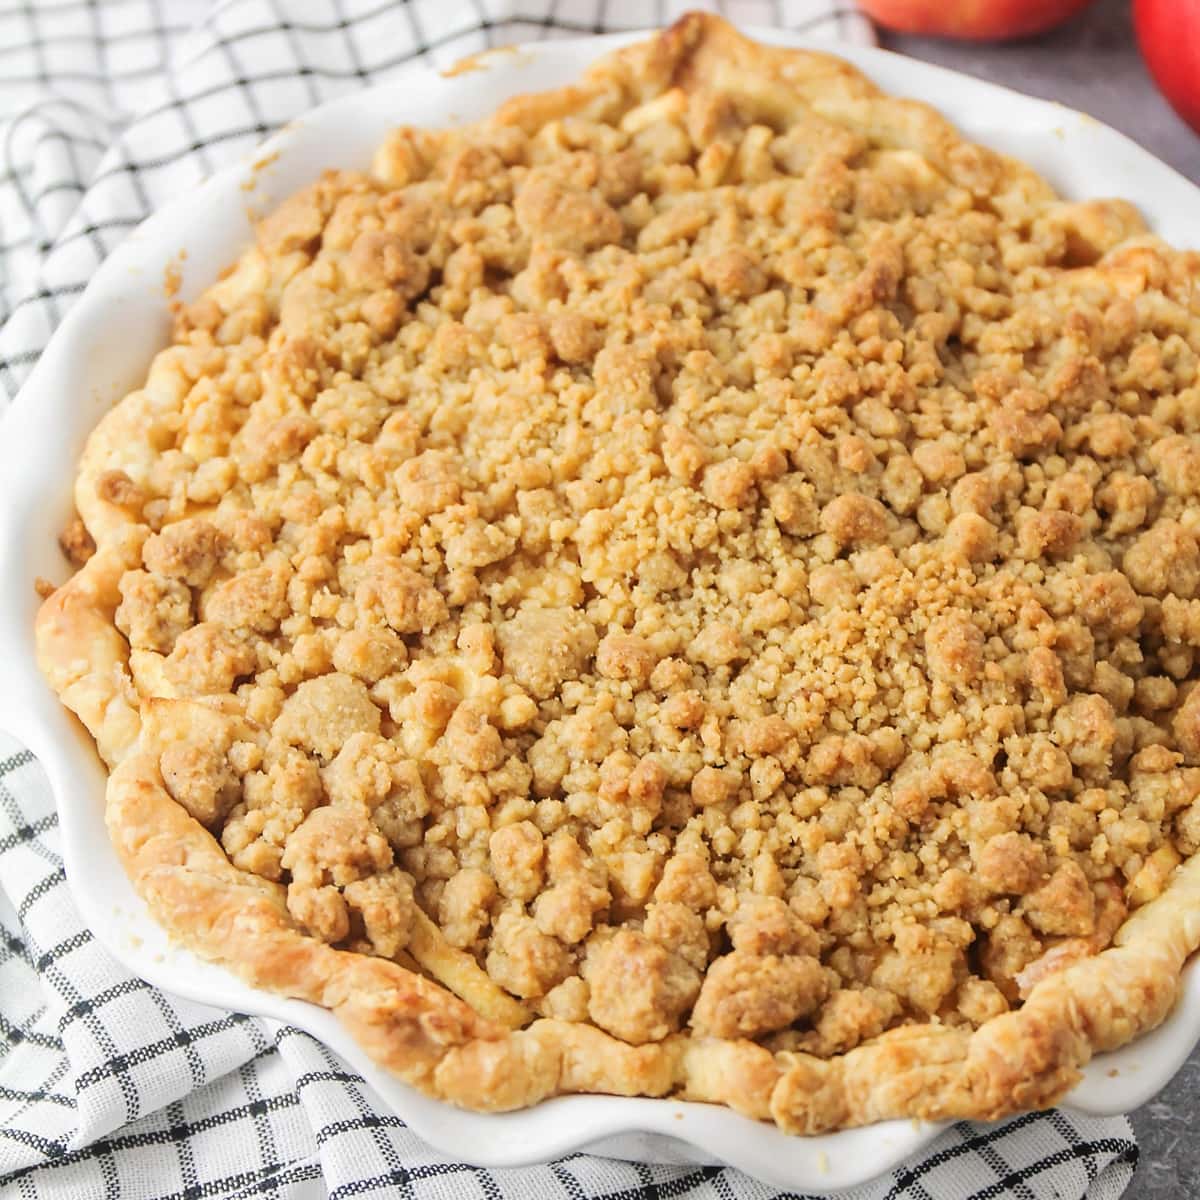 Crumb topping on a baked apple pie.